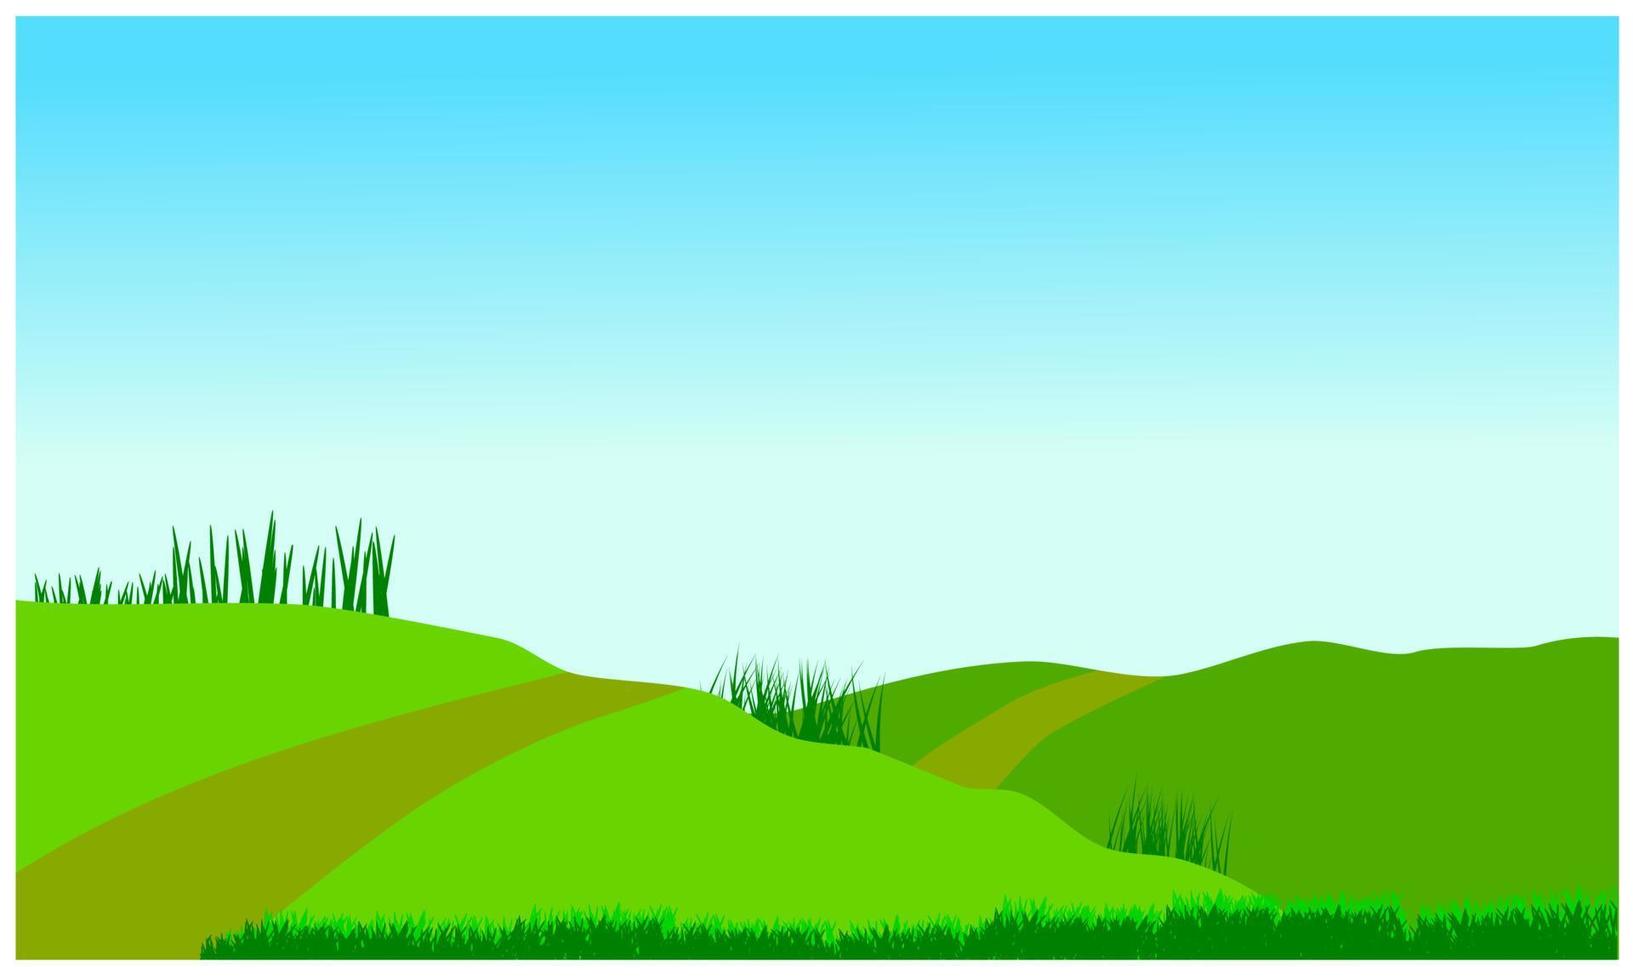 cartoon green hills landscape, meadow and sky background vector